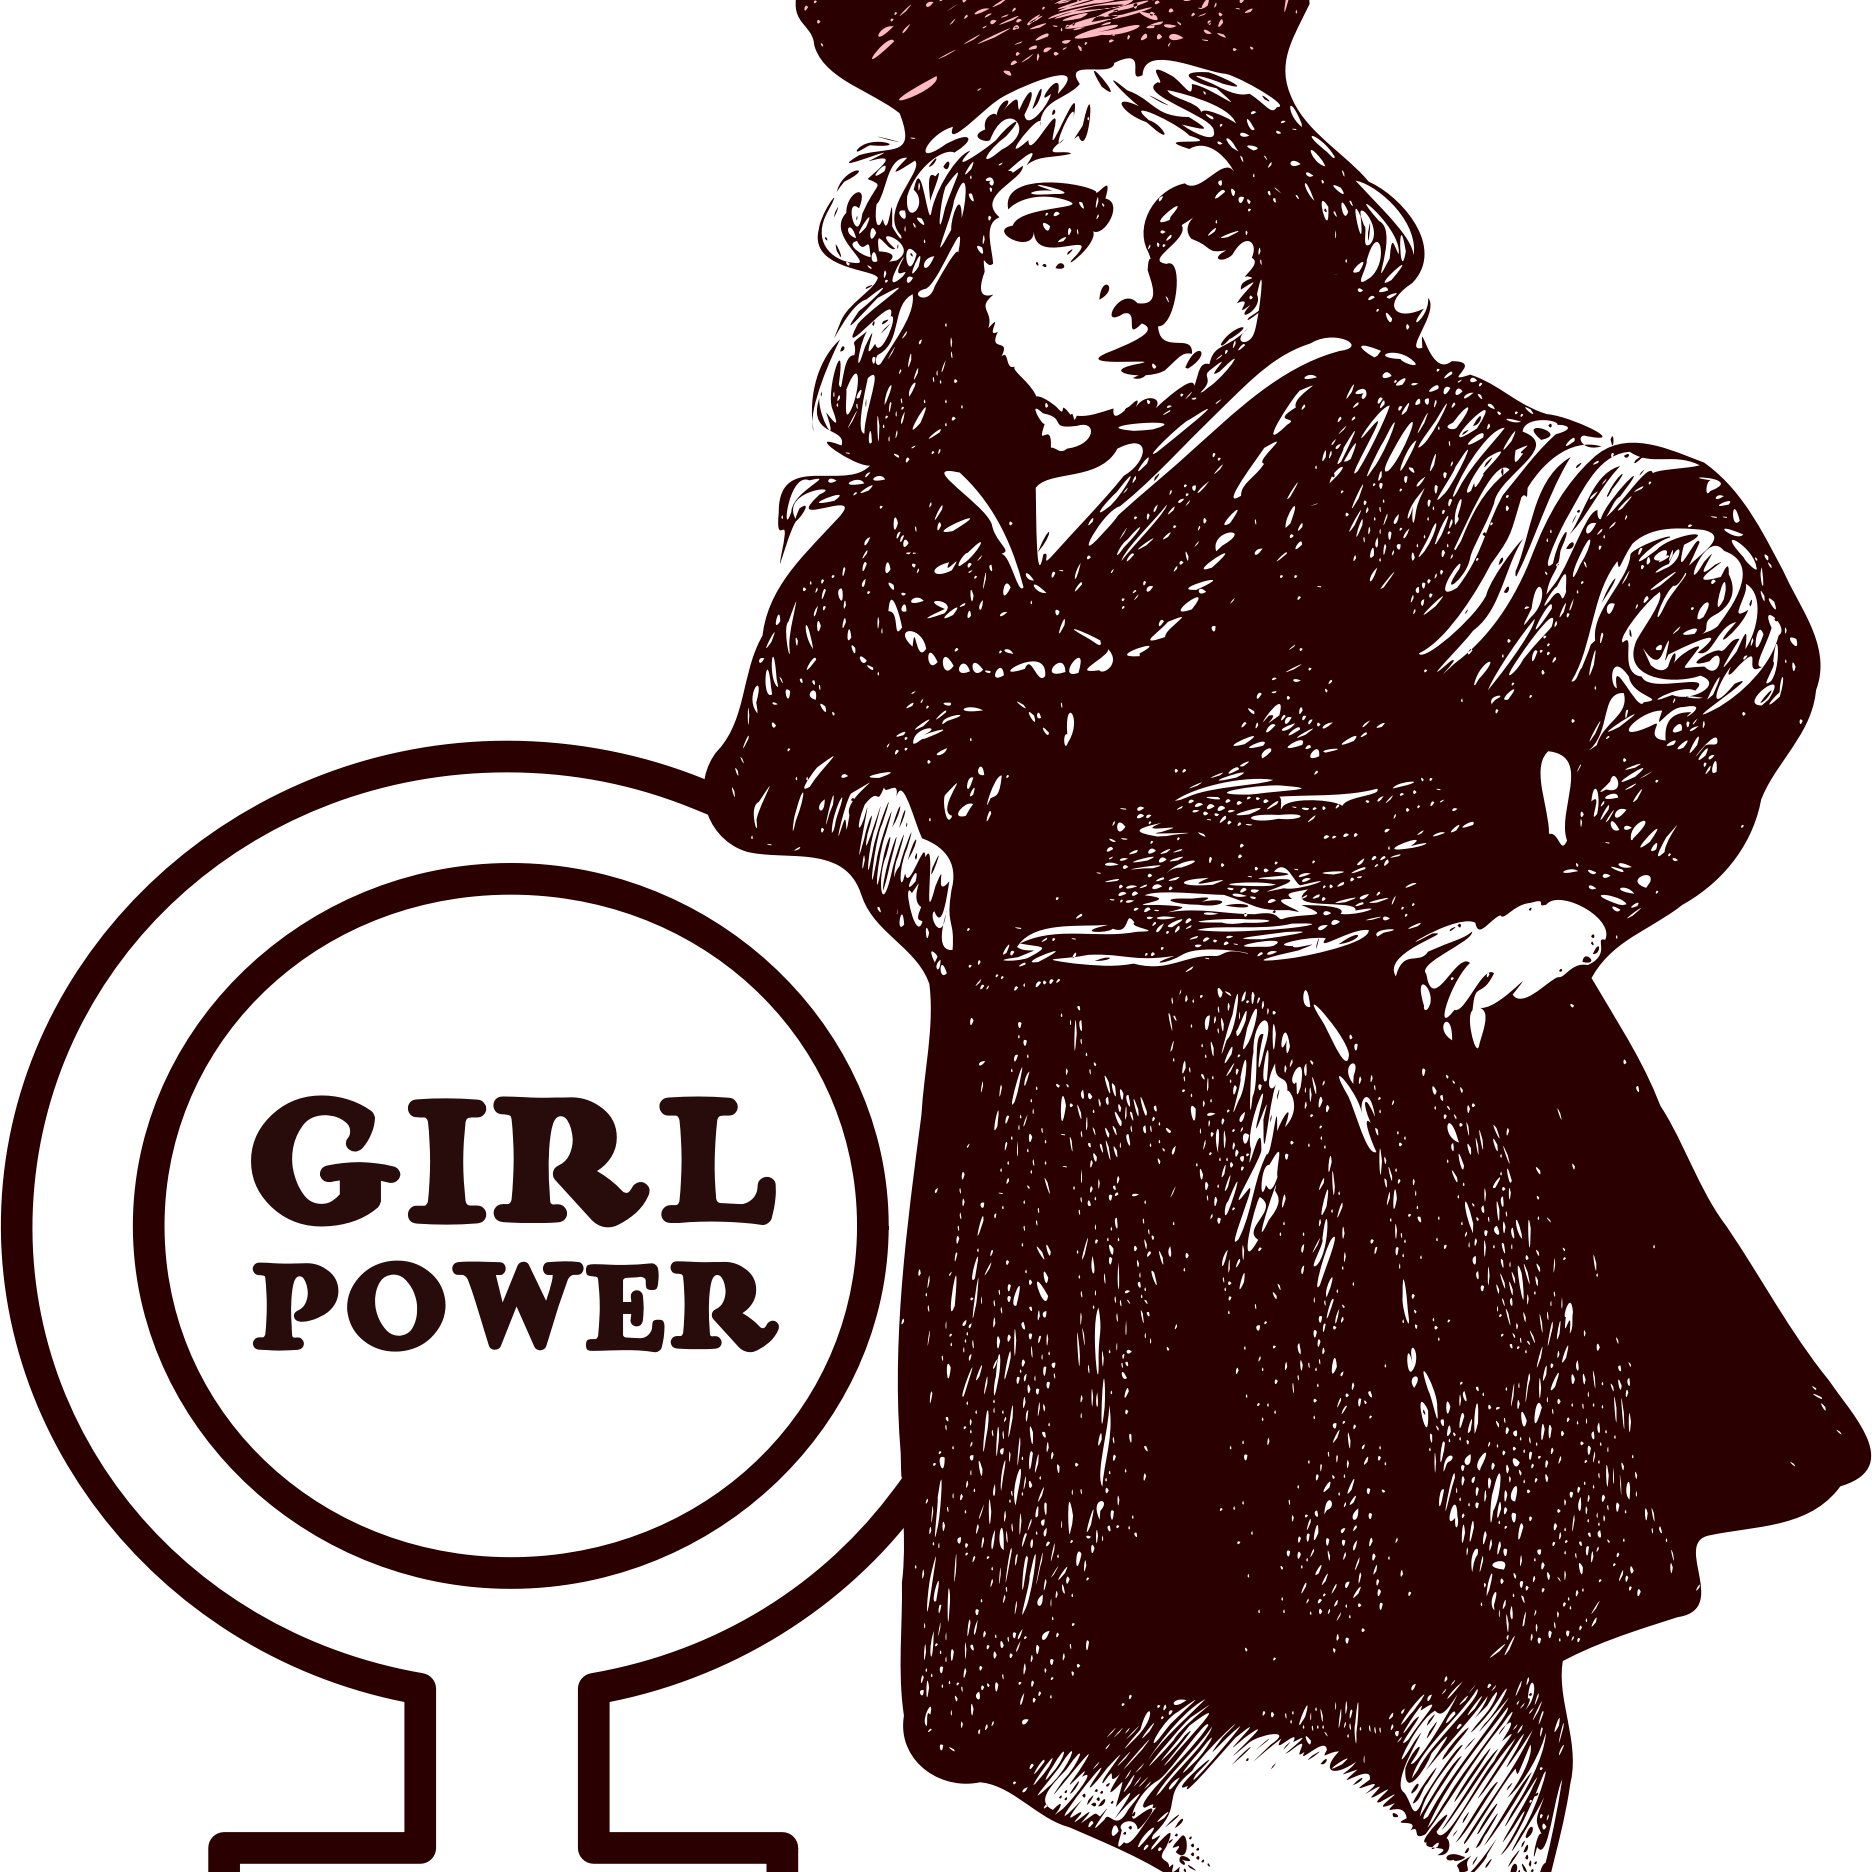 Spreading the powerful message of GirlPower!